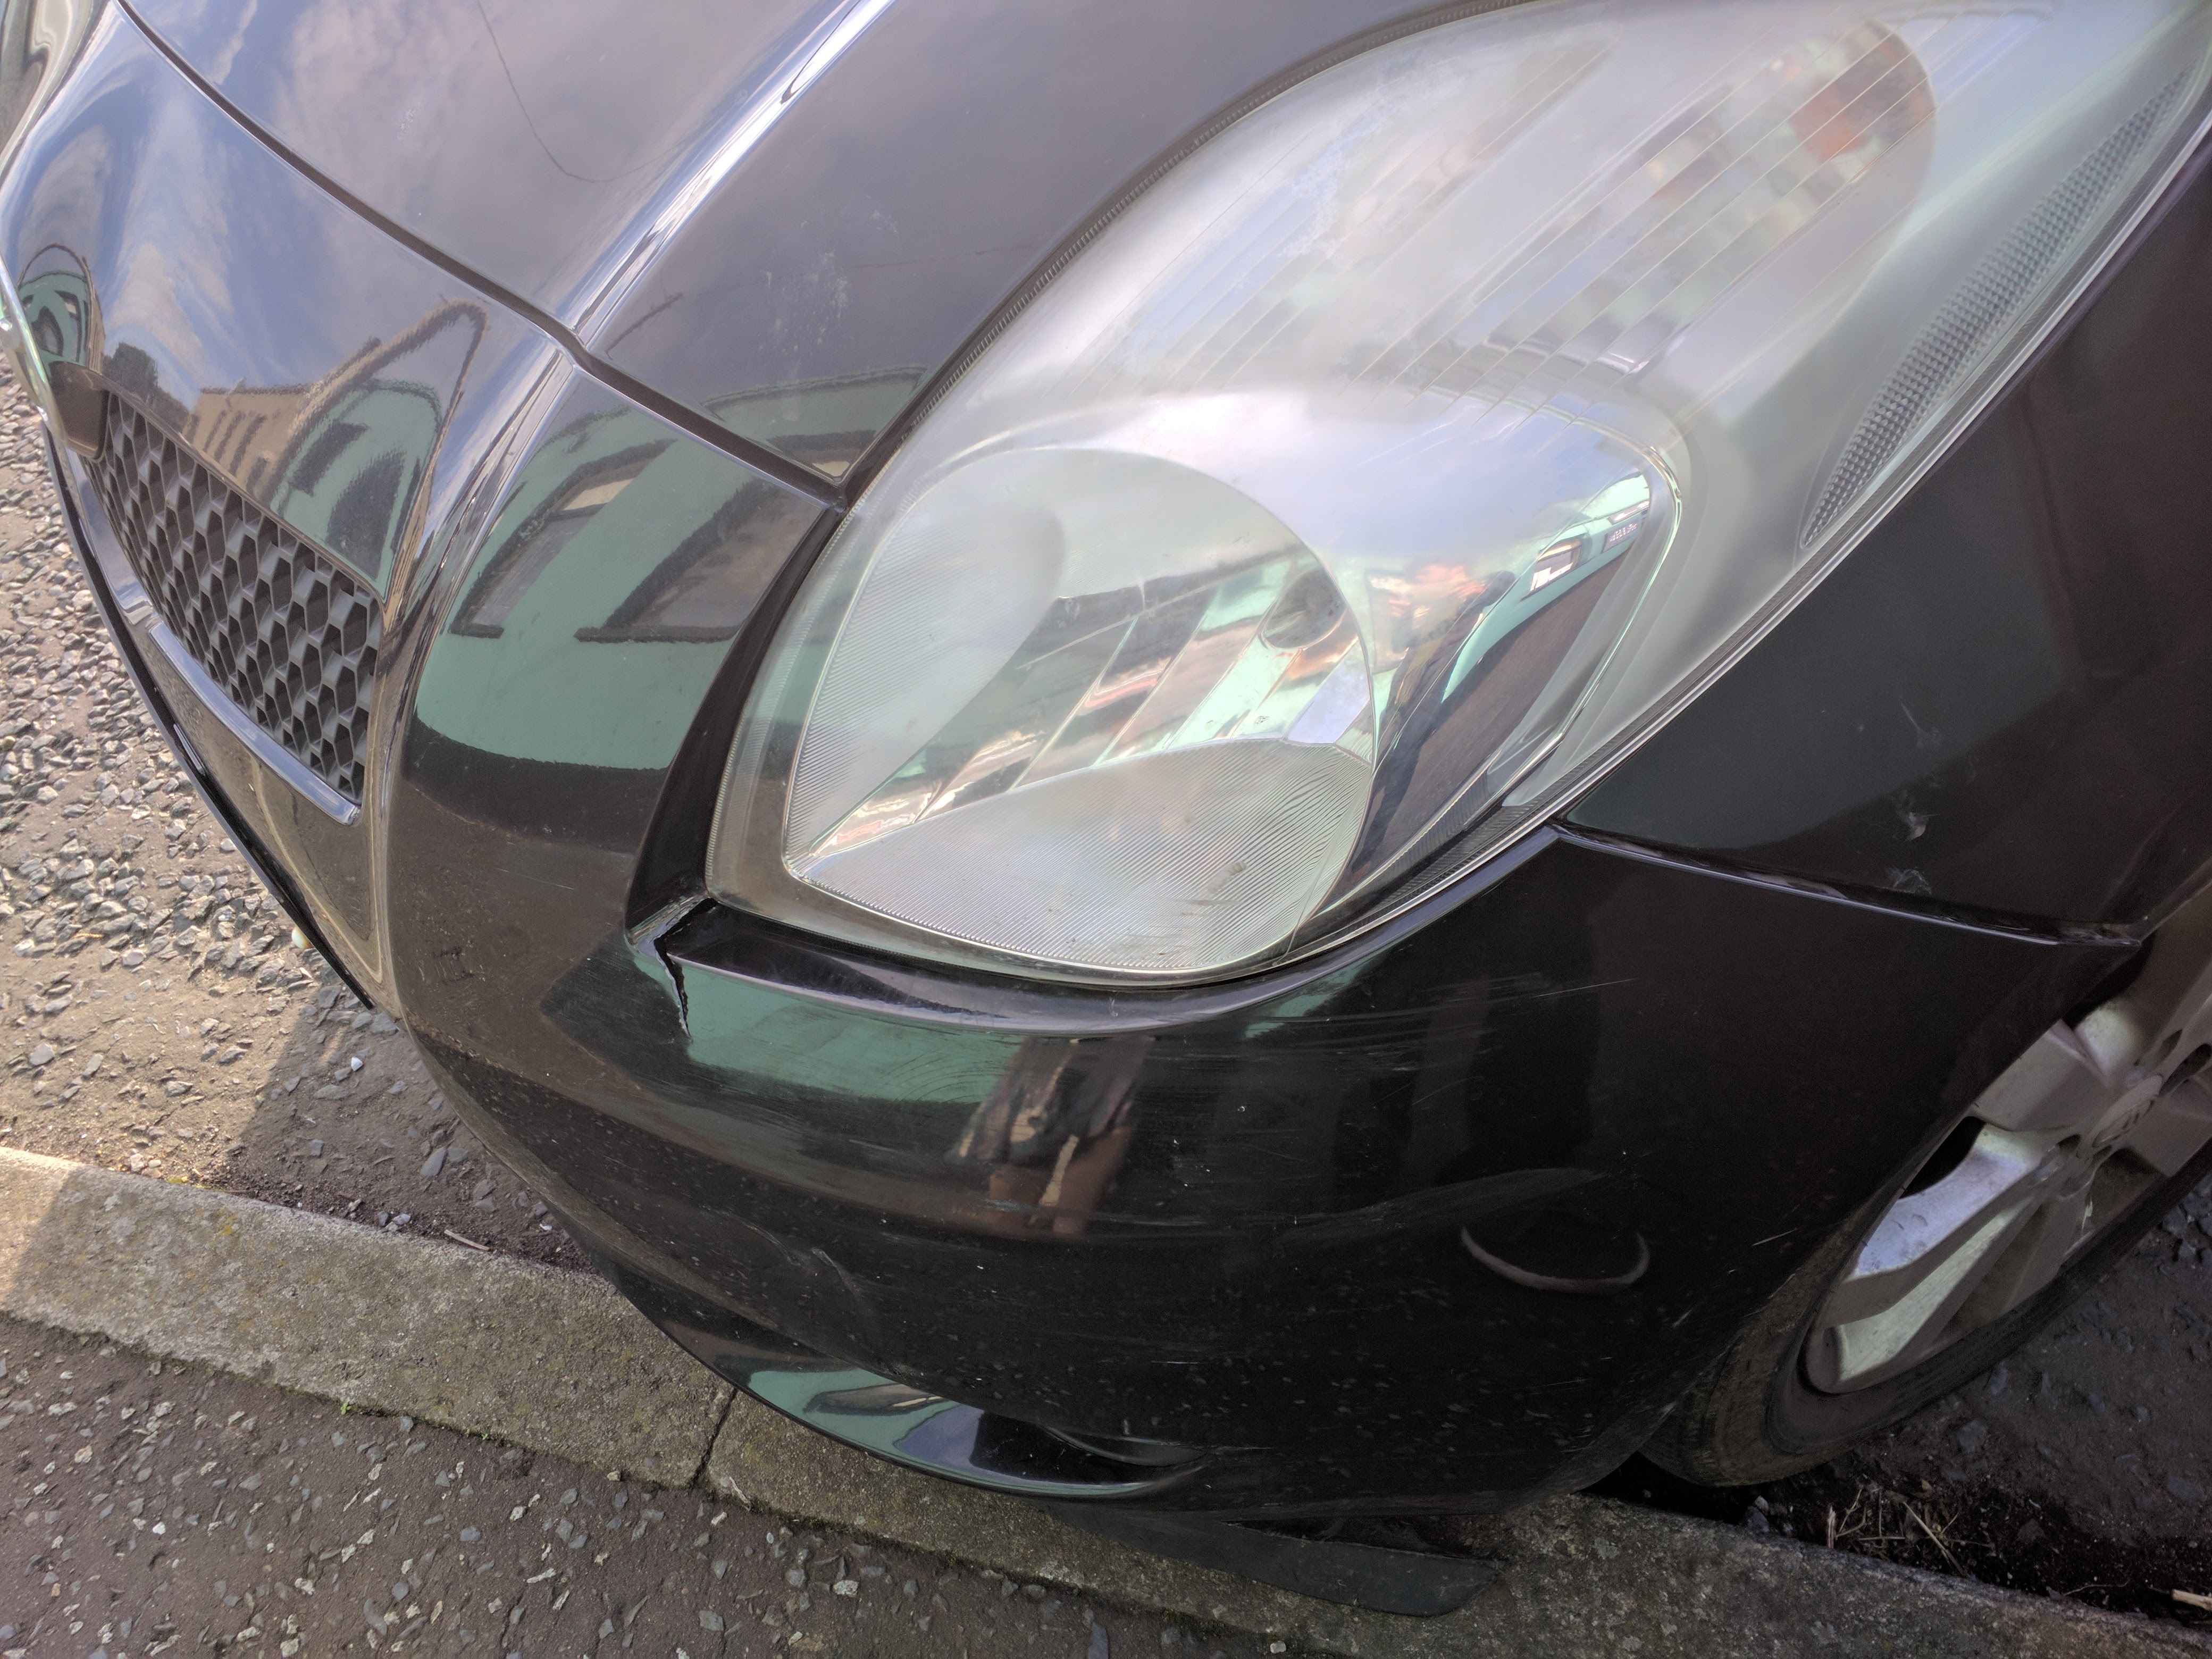 Cost to fix this damage? Yaris Club Toyota Owners Club